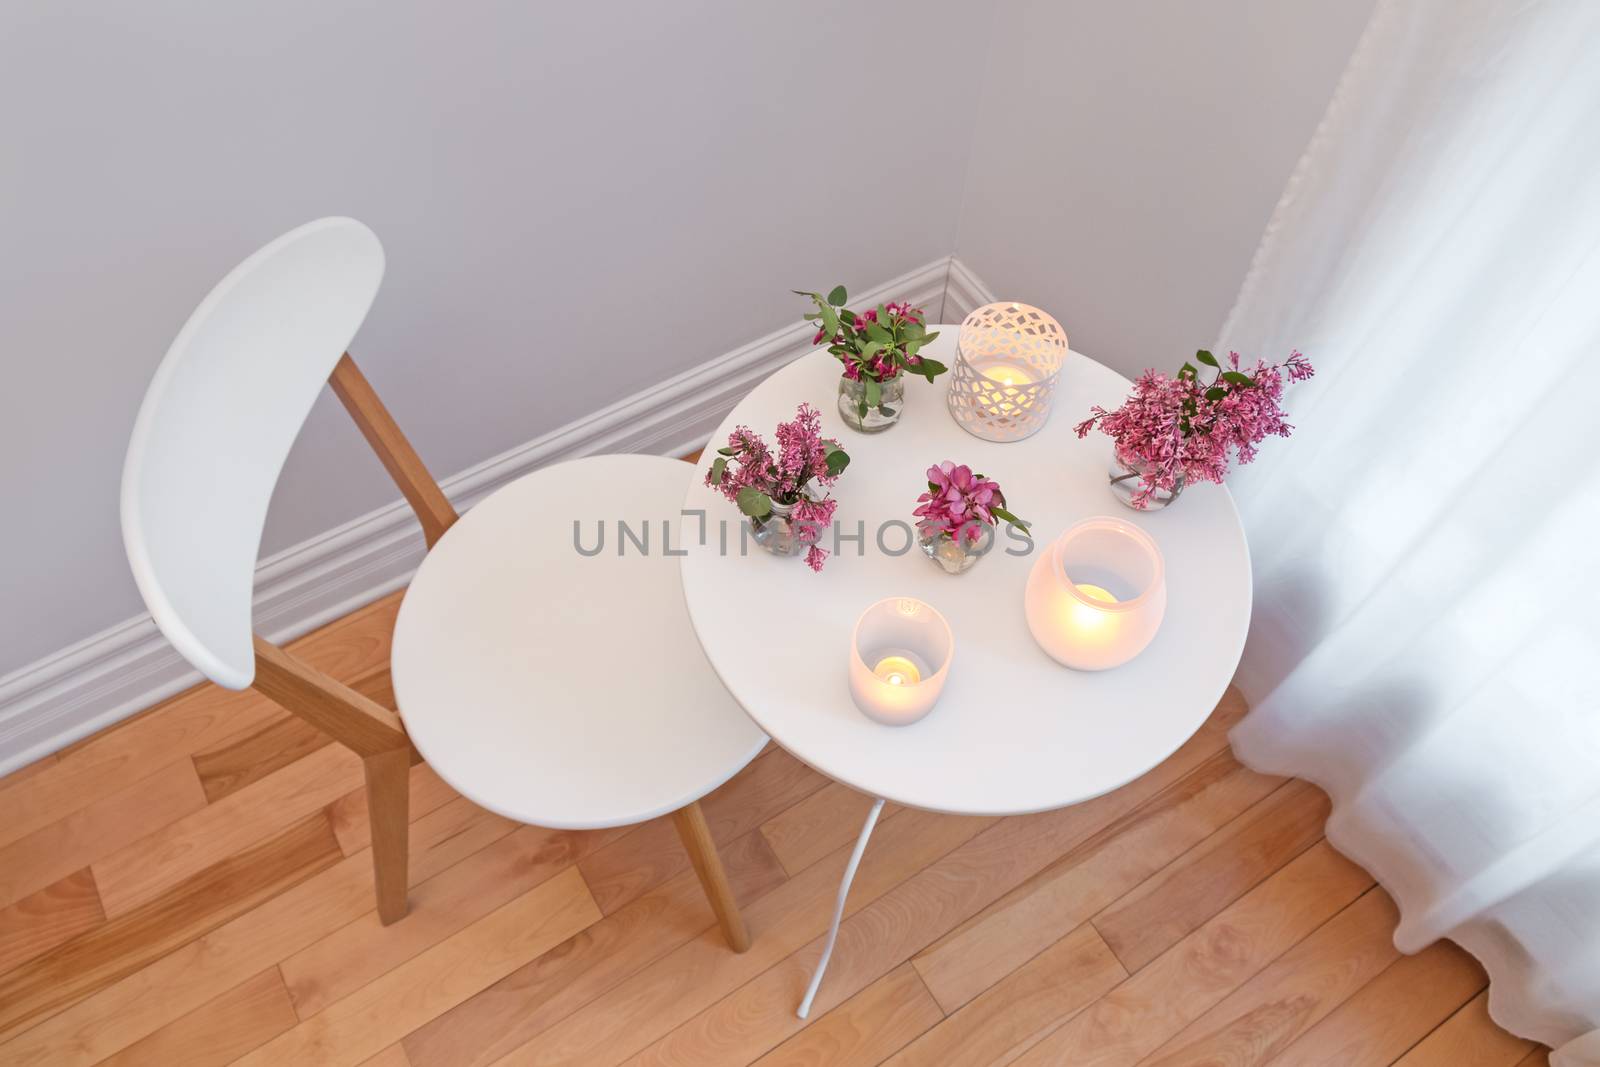 Cozy home interior with white chair and table, decorated with candle lights and spring flowers.